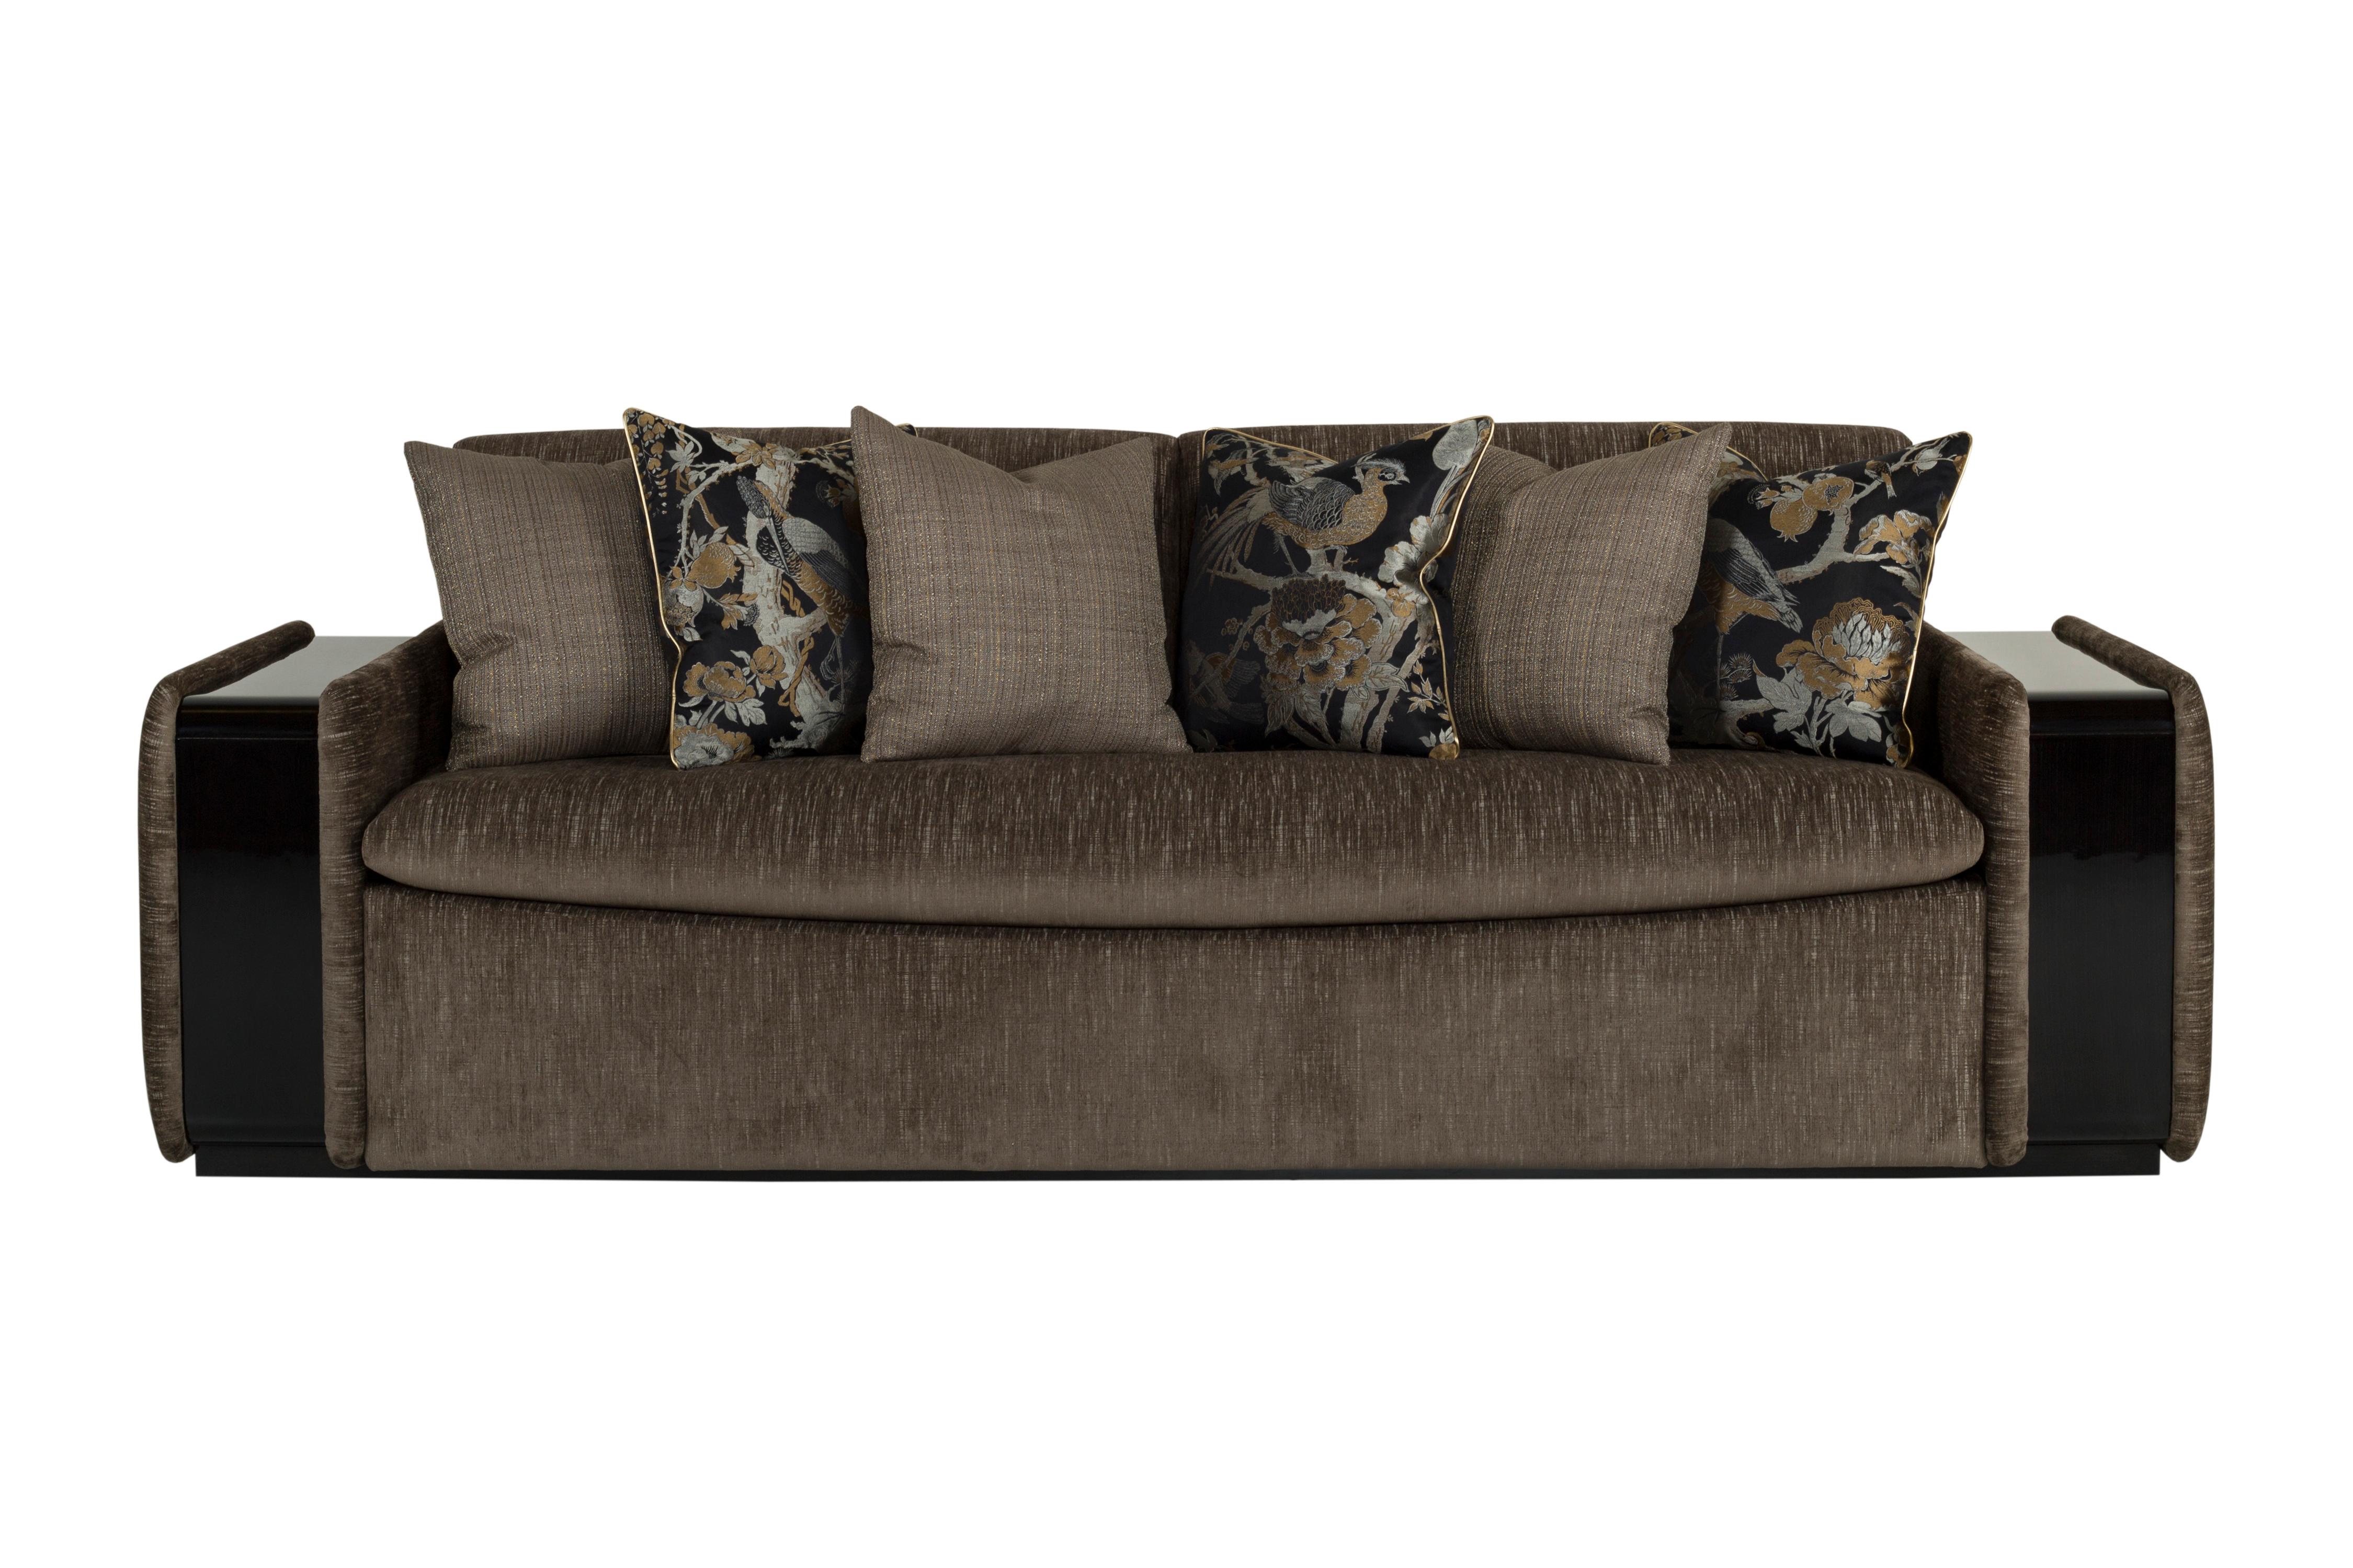 Magno Sofa, Modern Collection, Handcrafted in Portugal - Europe by GF Modern.

Upholstered in dark brown cotton fabric, Magno's bold lines and enveloping comfort are handcrafted with breathtaking precision. With its very strong and daring character,